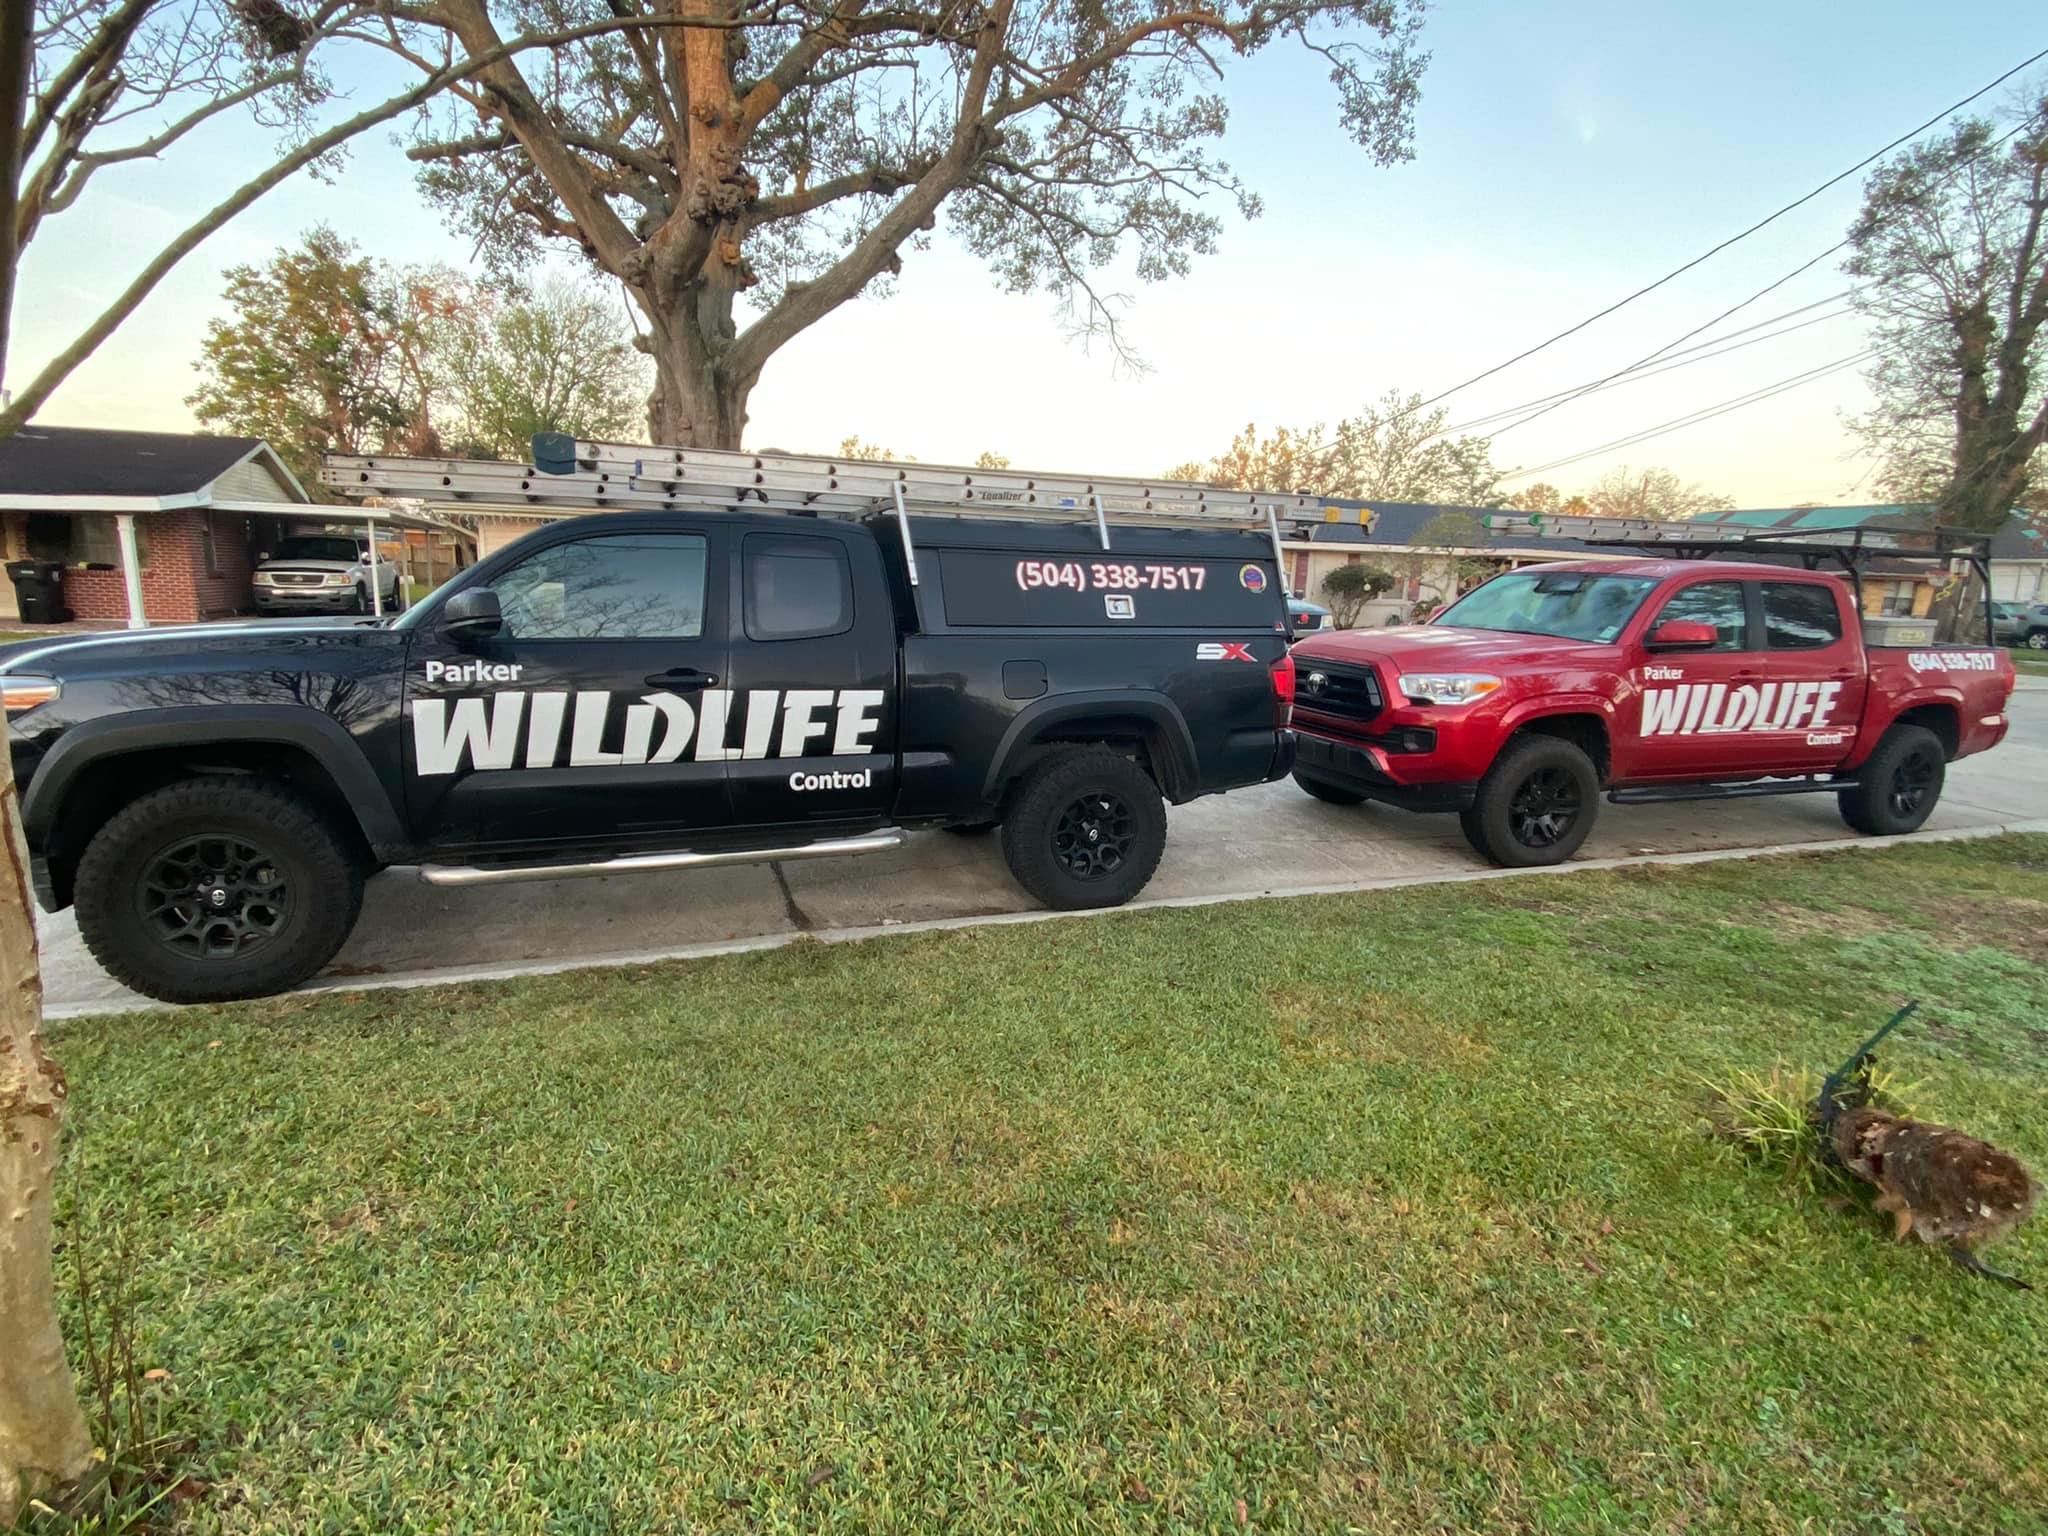 Parker Wildlife Control Red and Black Trucks